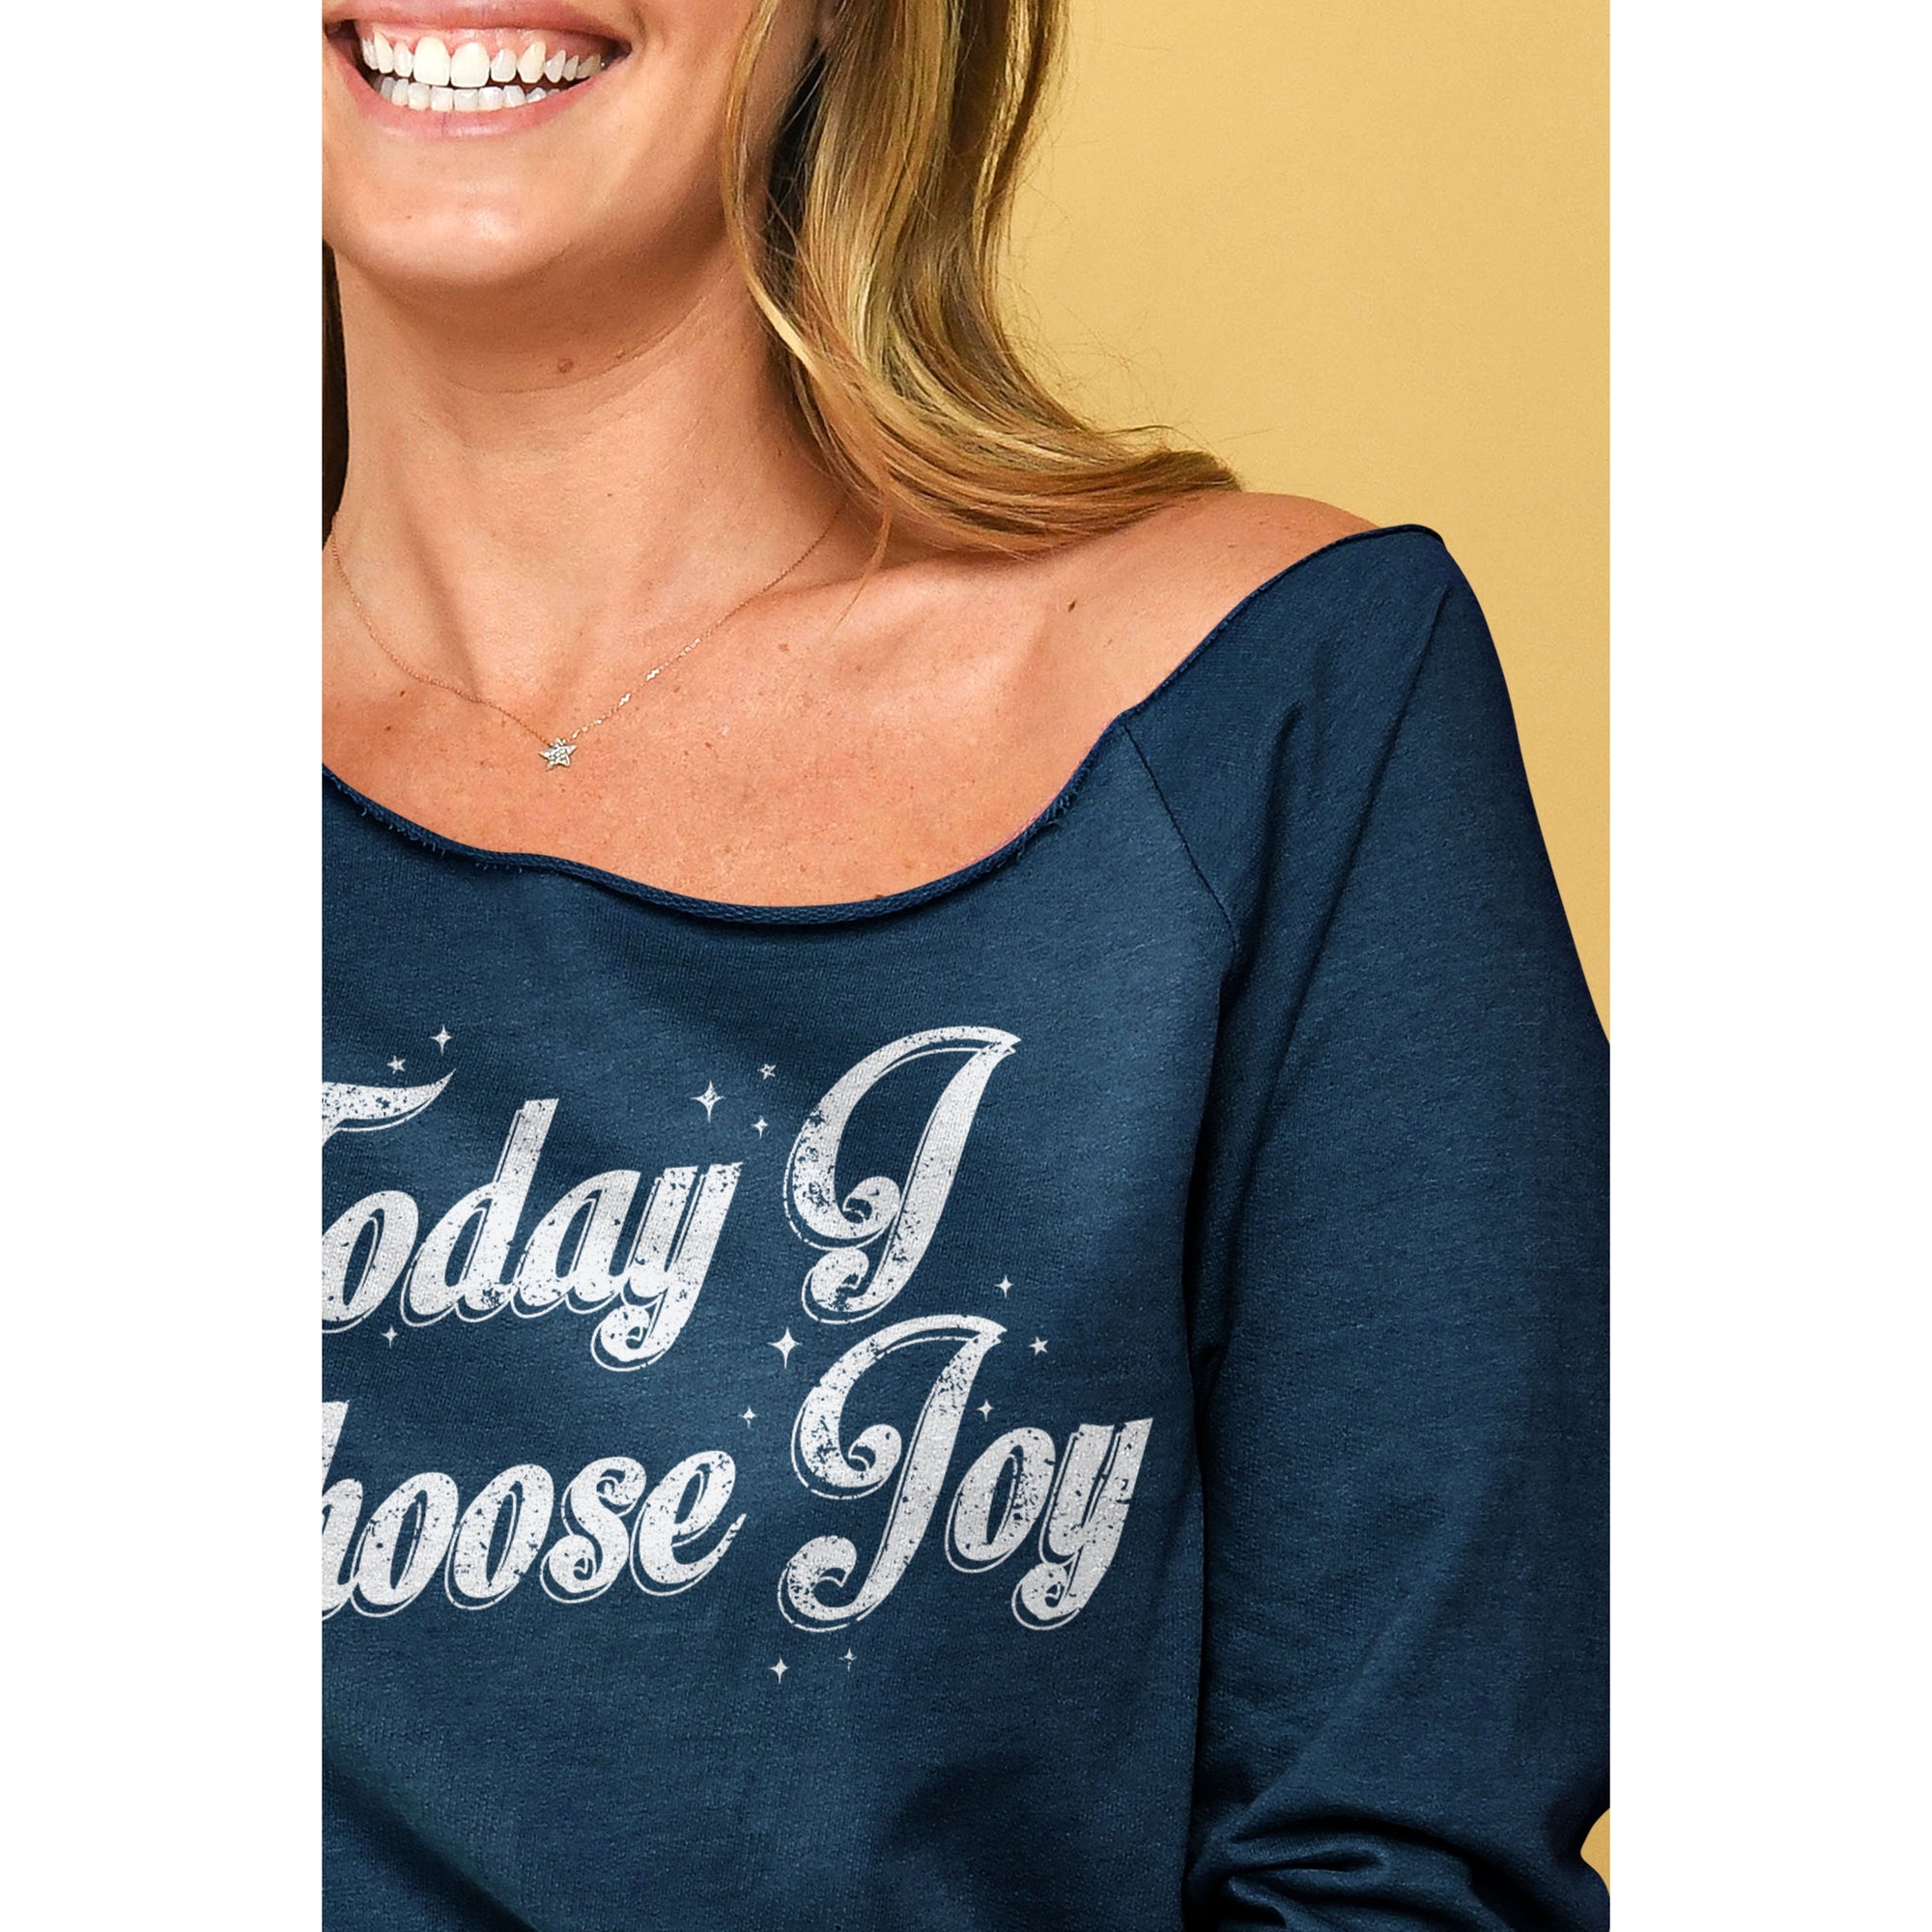 Today I Choose Joy - threadtank | stories you can wear